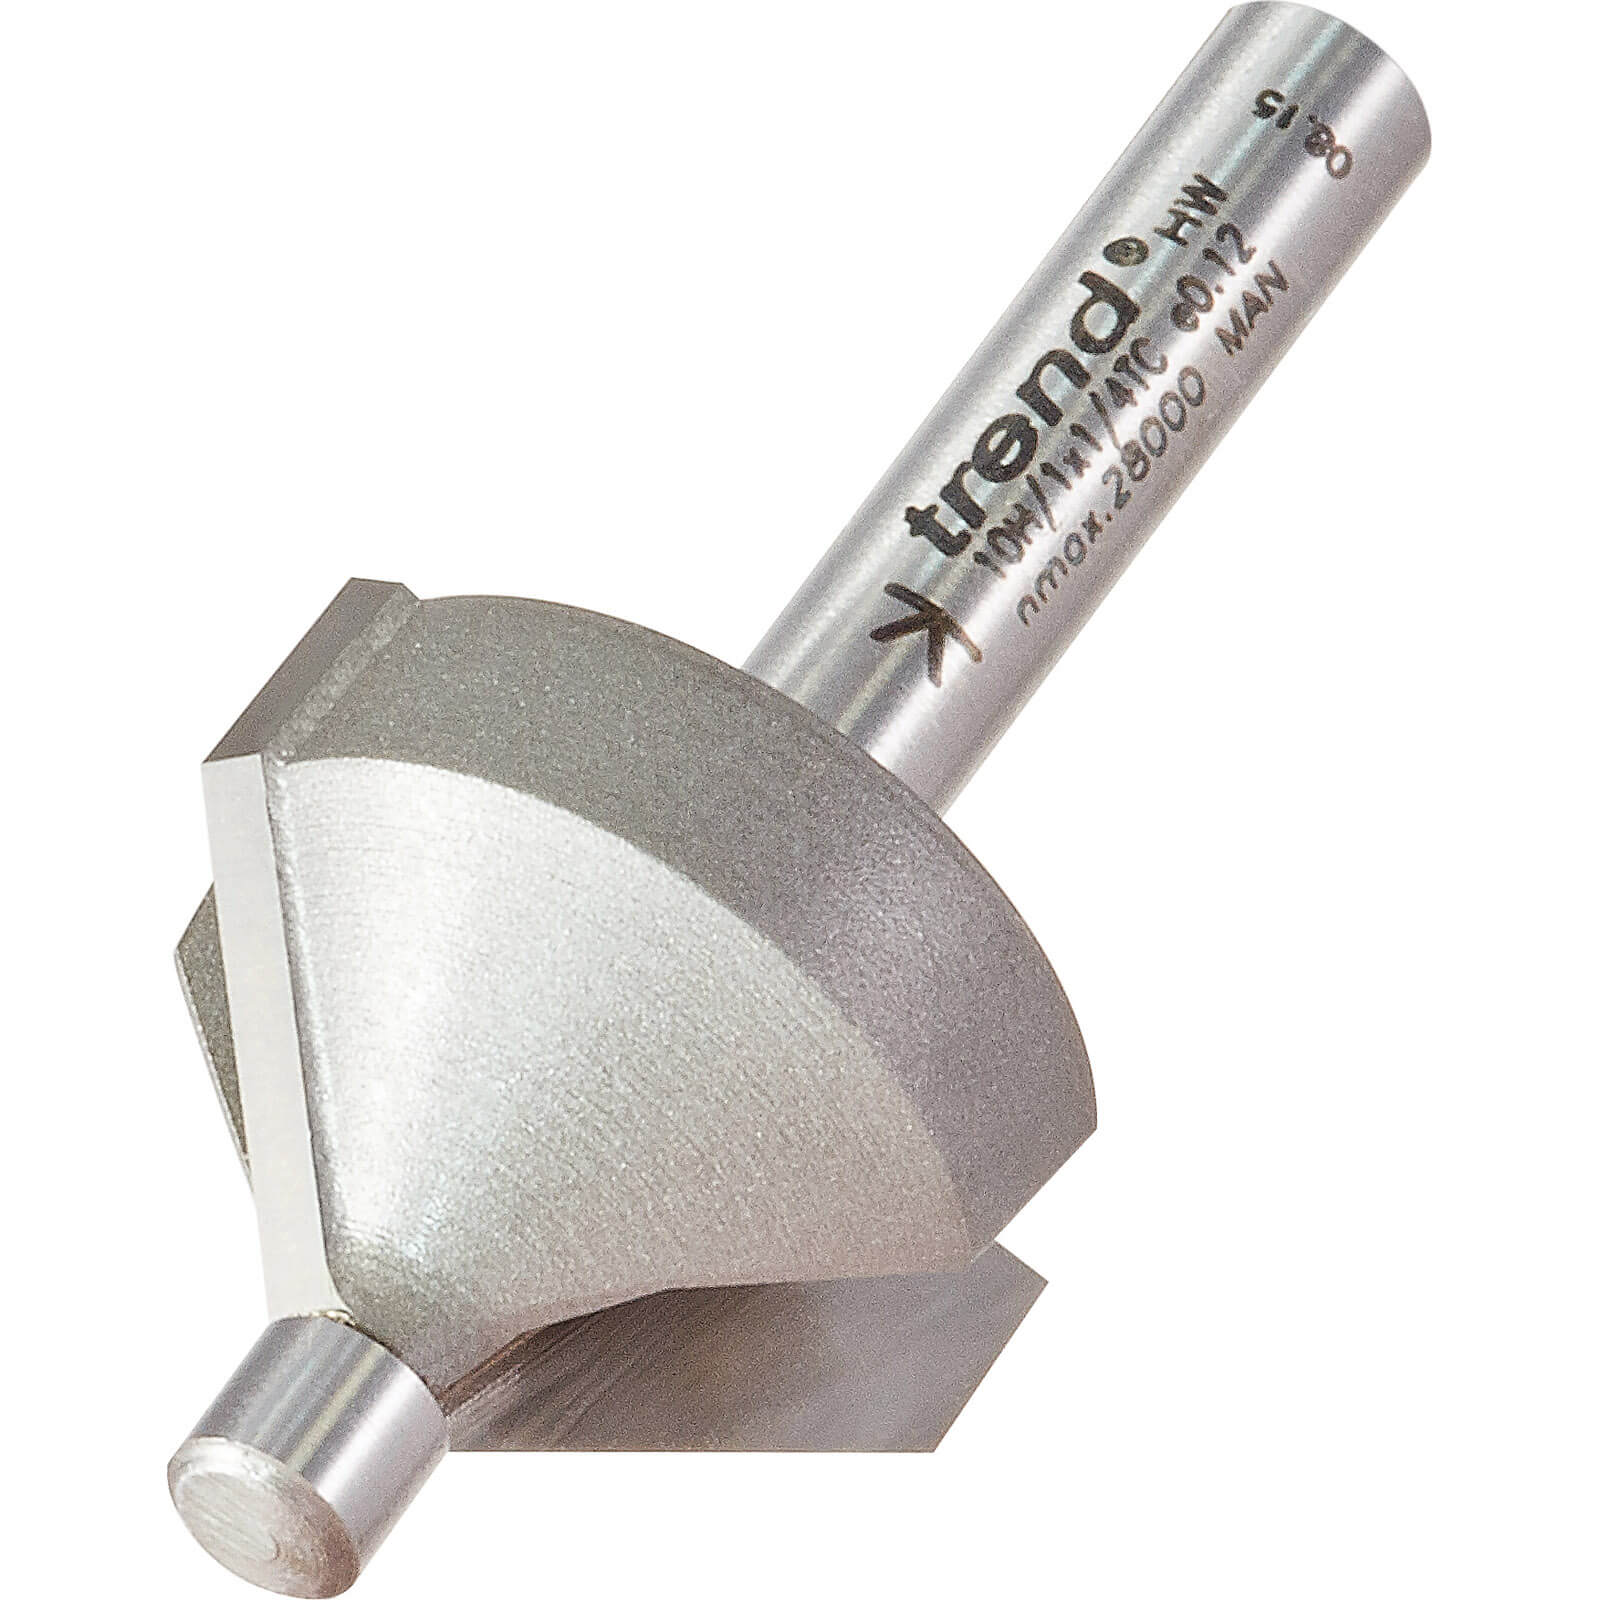 Image of Trend Pin Guided Chamfer Bevel Router Cutter 45 Degrees 10mm 1/4"